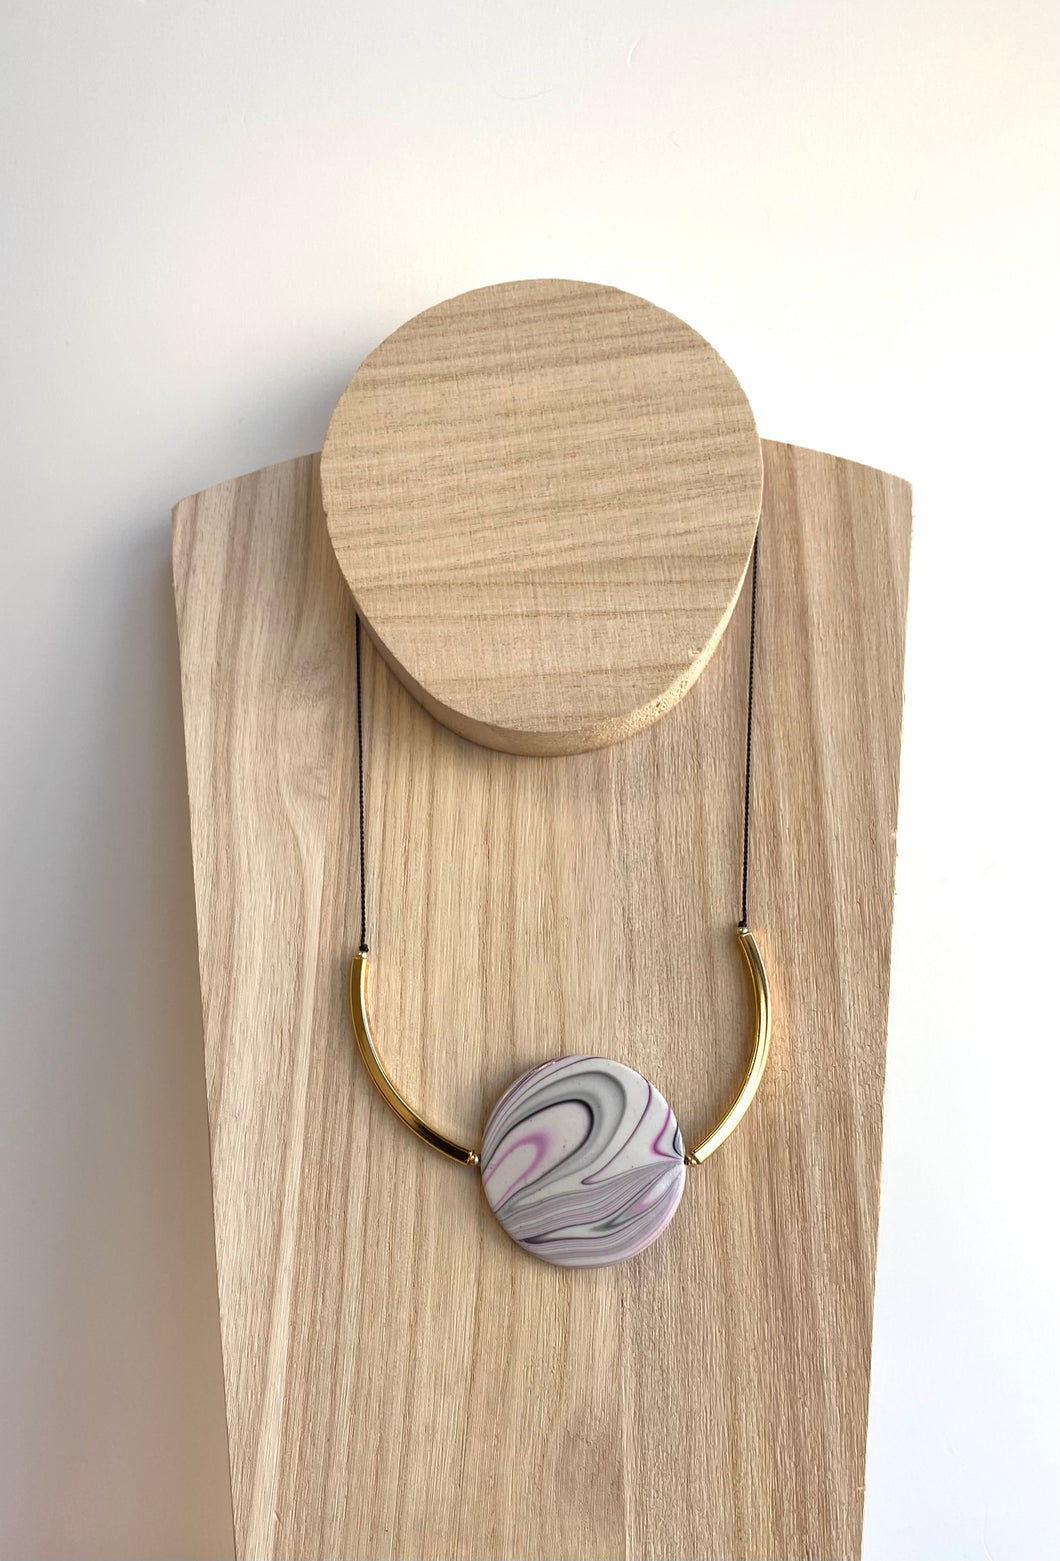 Kappos Pink Swirl Disk Necklace